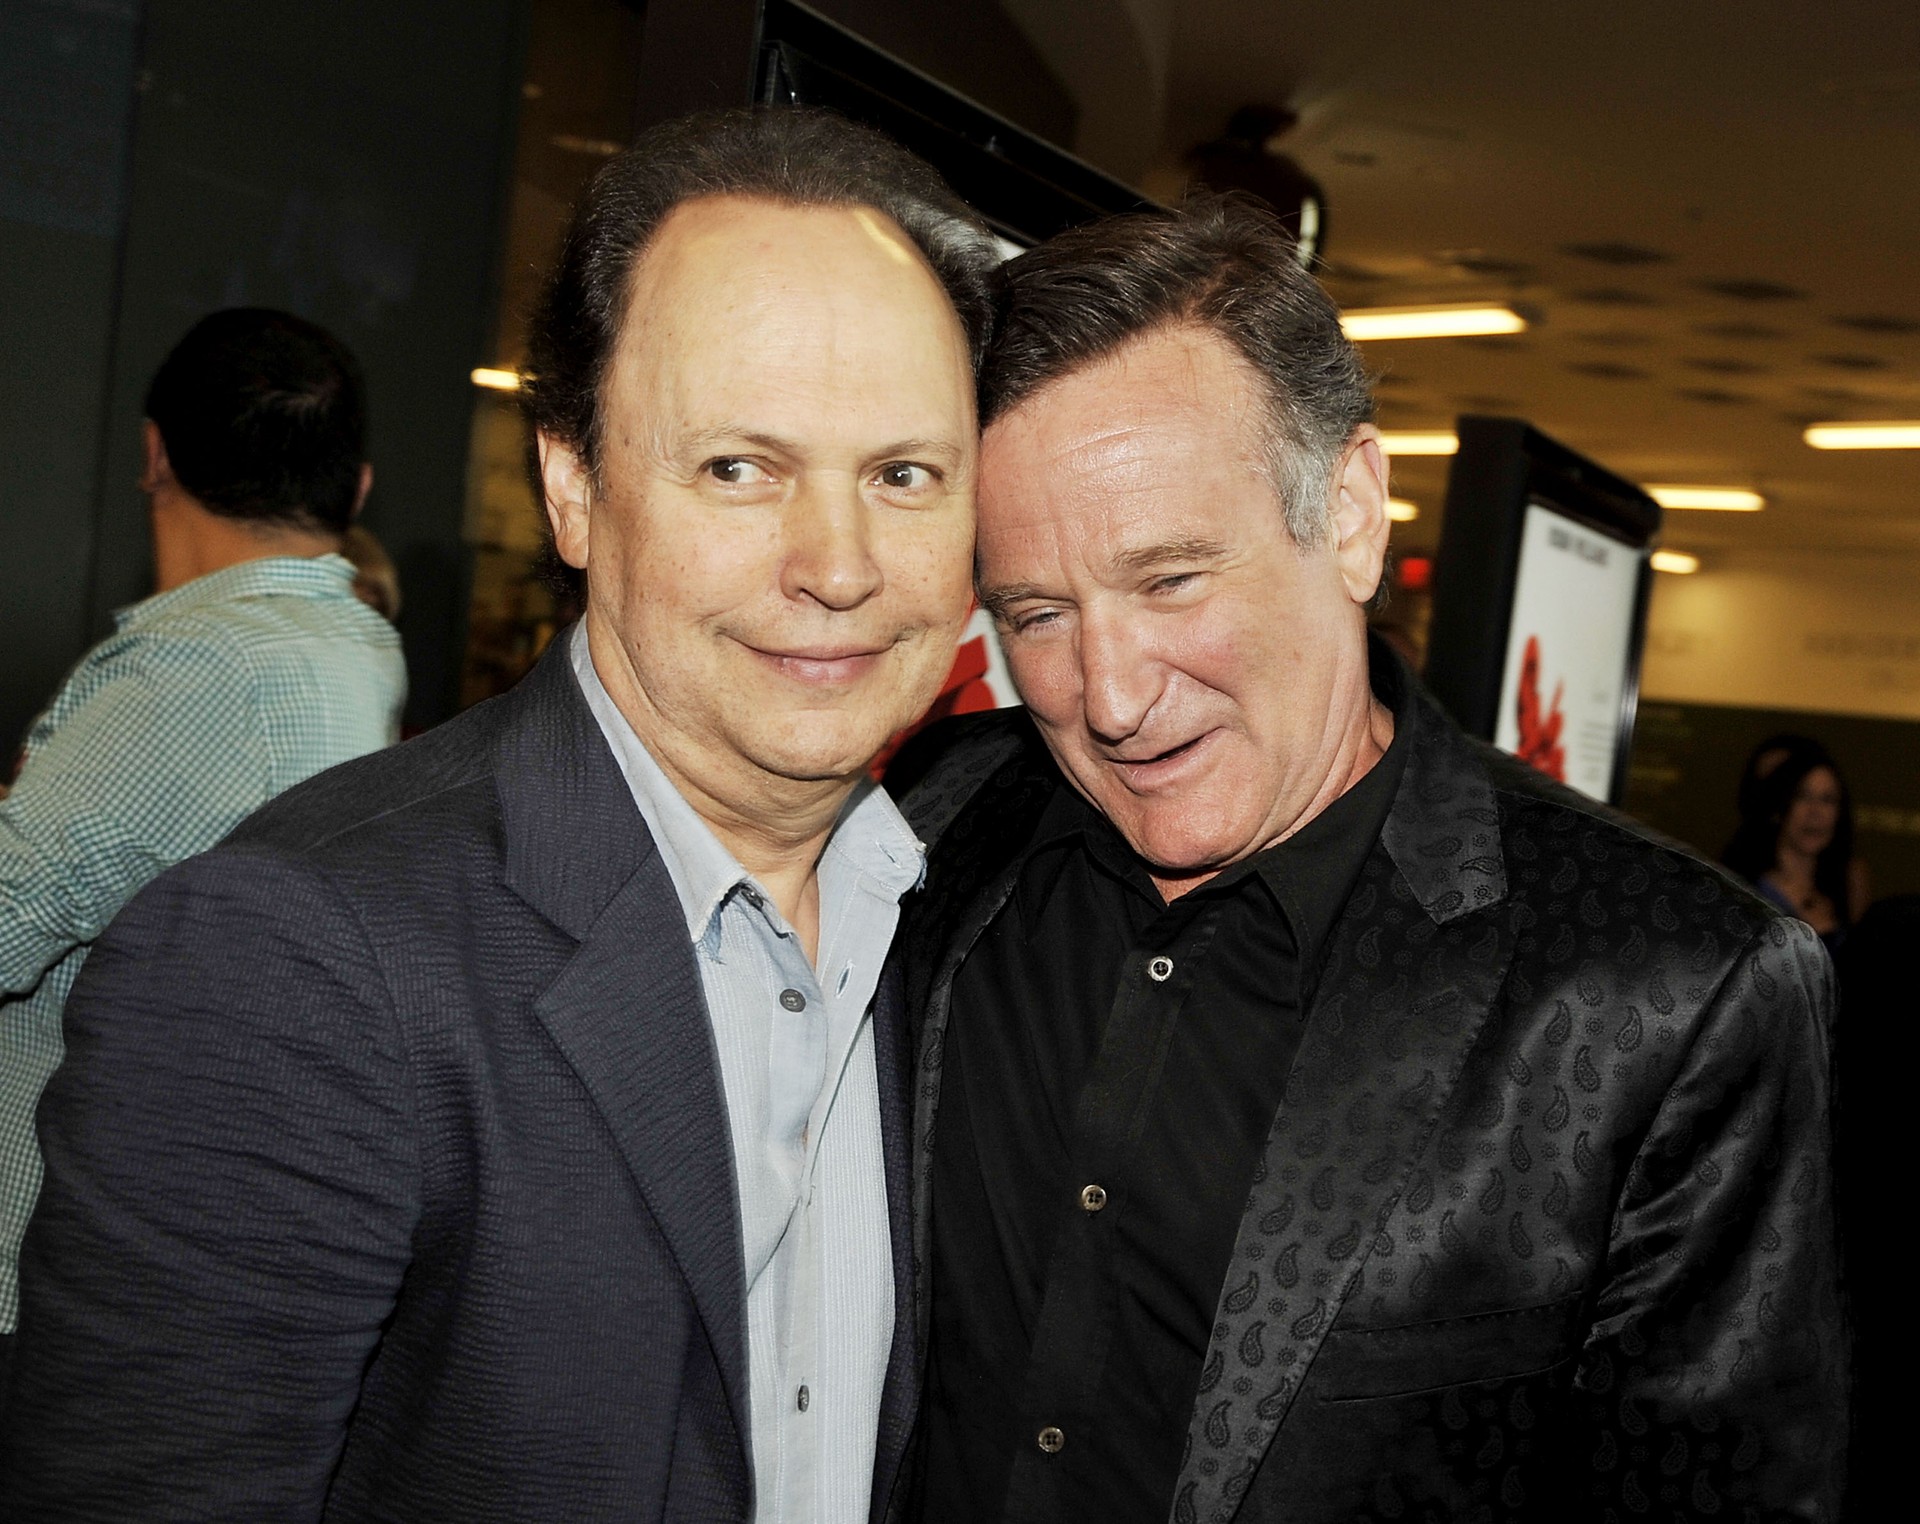 Robin Williams e Billy Crystal. (Foto: Getty Images)